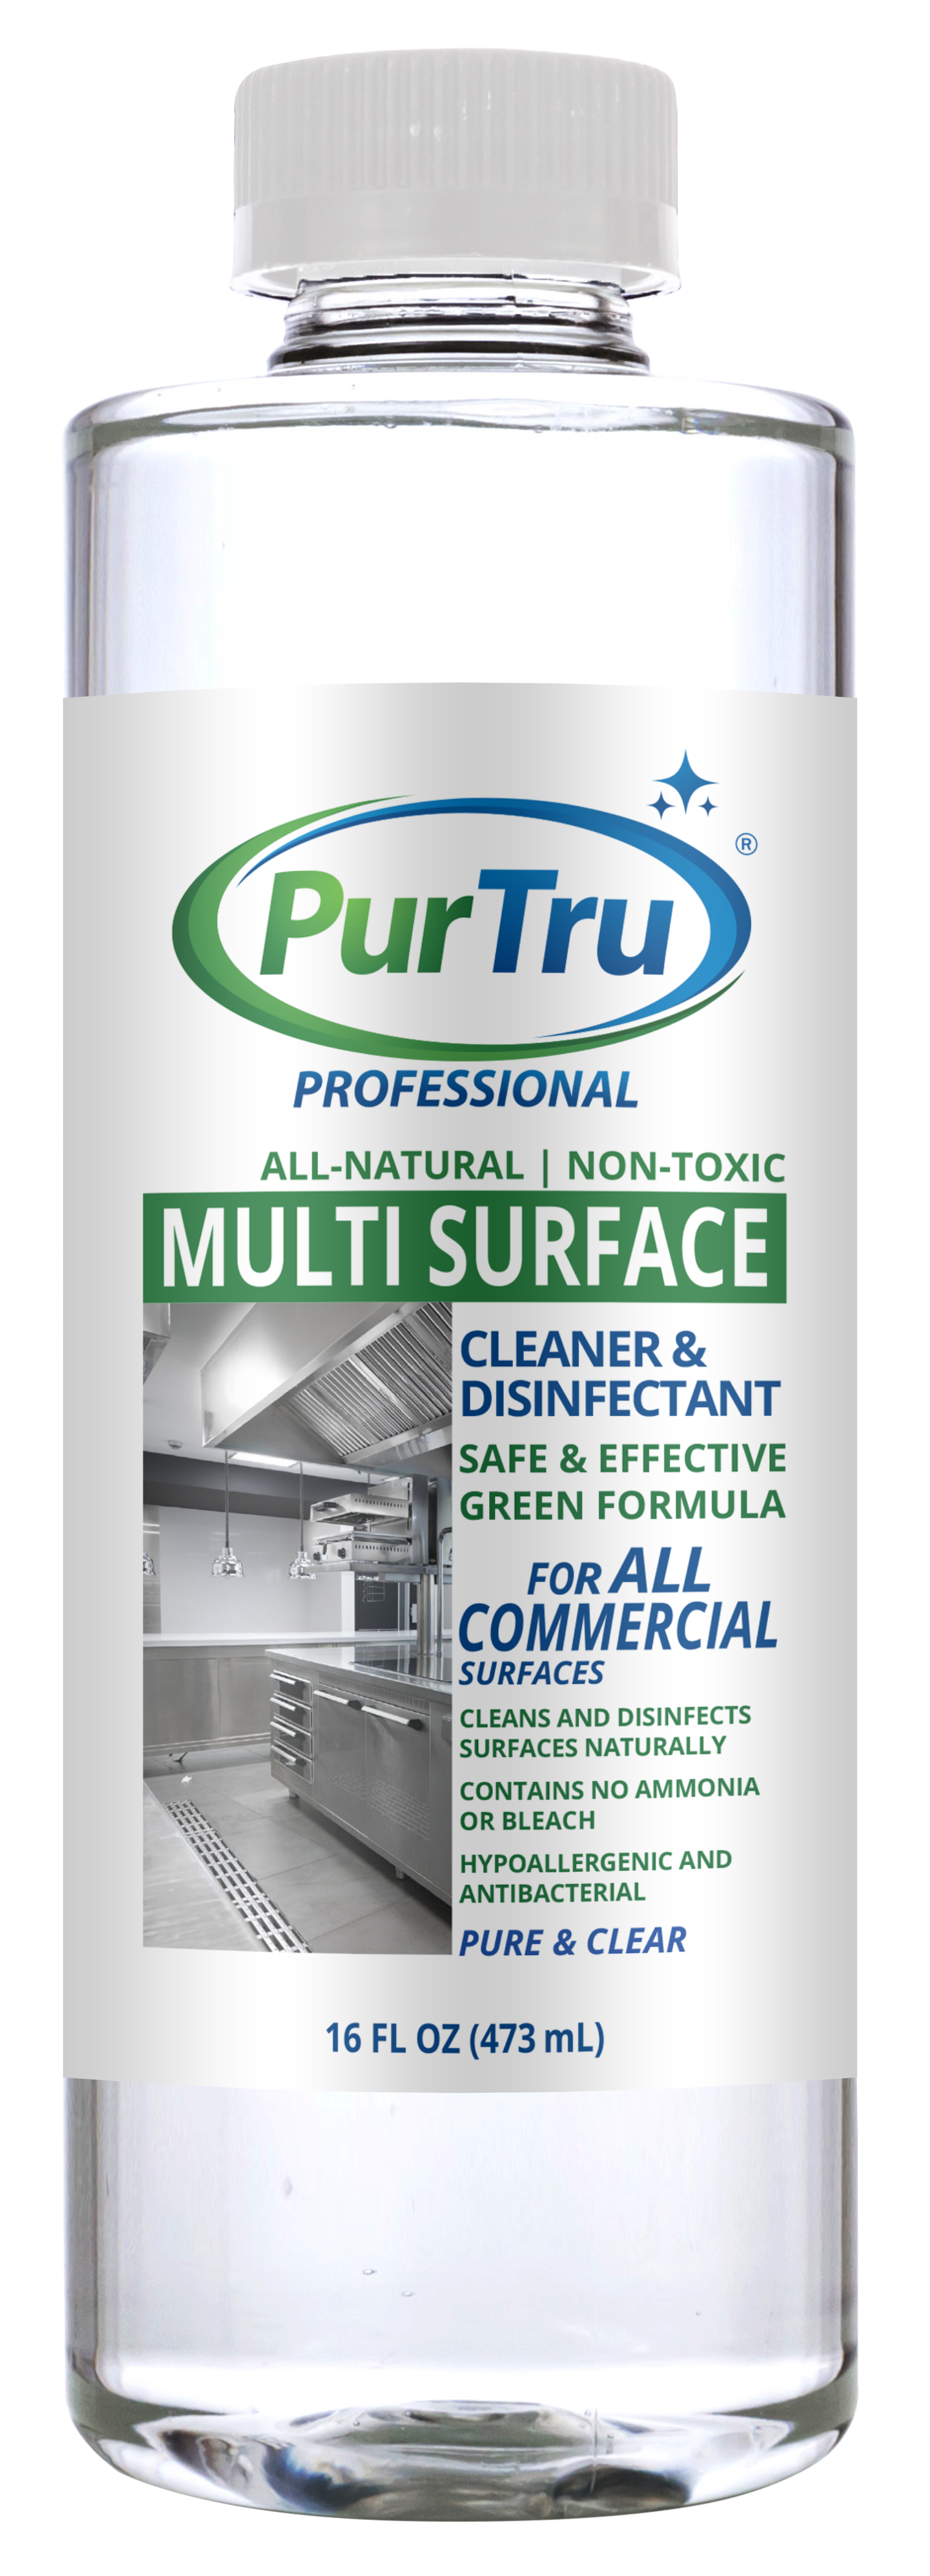 PurTru® PROFESSIONAL Multi Surface Disinfecting and Cleaning Solution